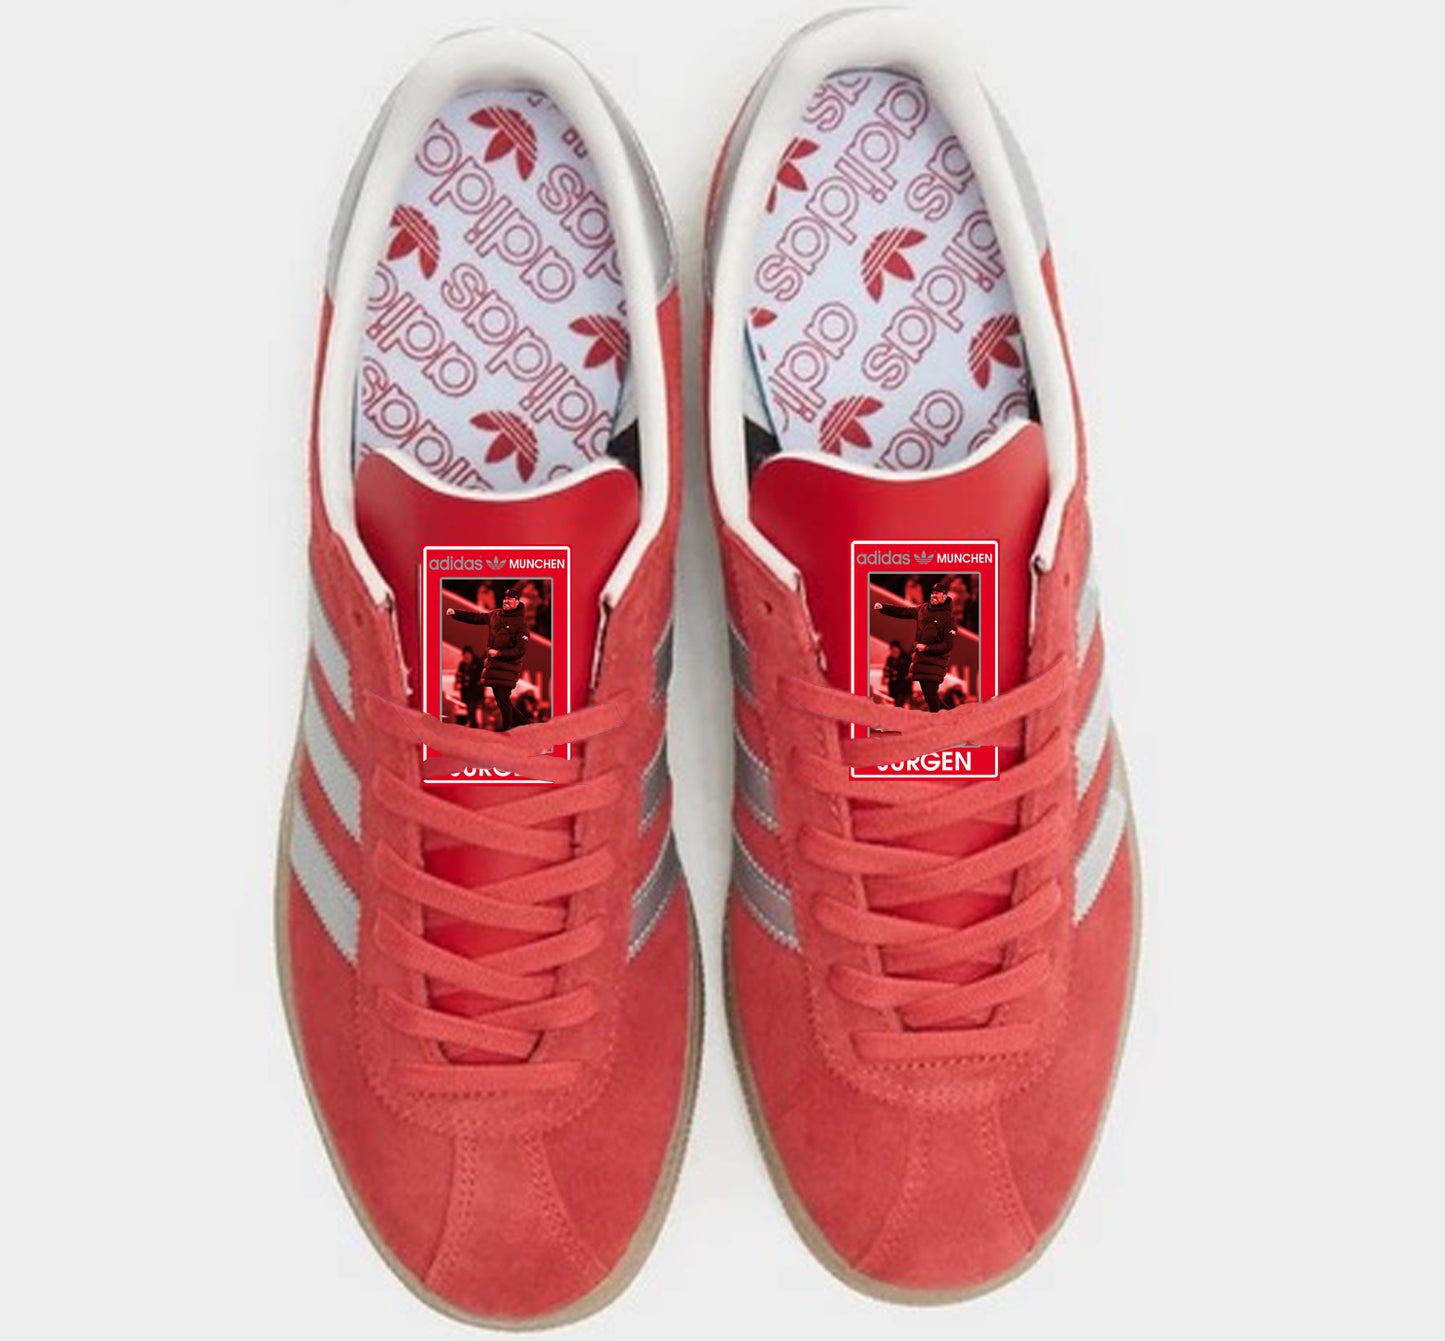 Limited edition Liverpool FC Jurgen Klopp 6 trophies inspired red / silver Adidas custom Munchen trainers / sneakers